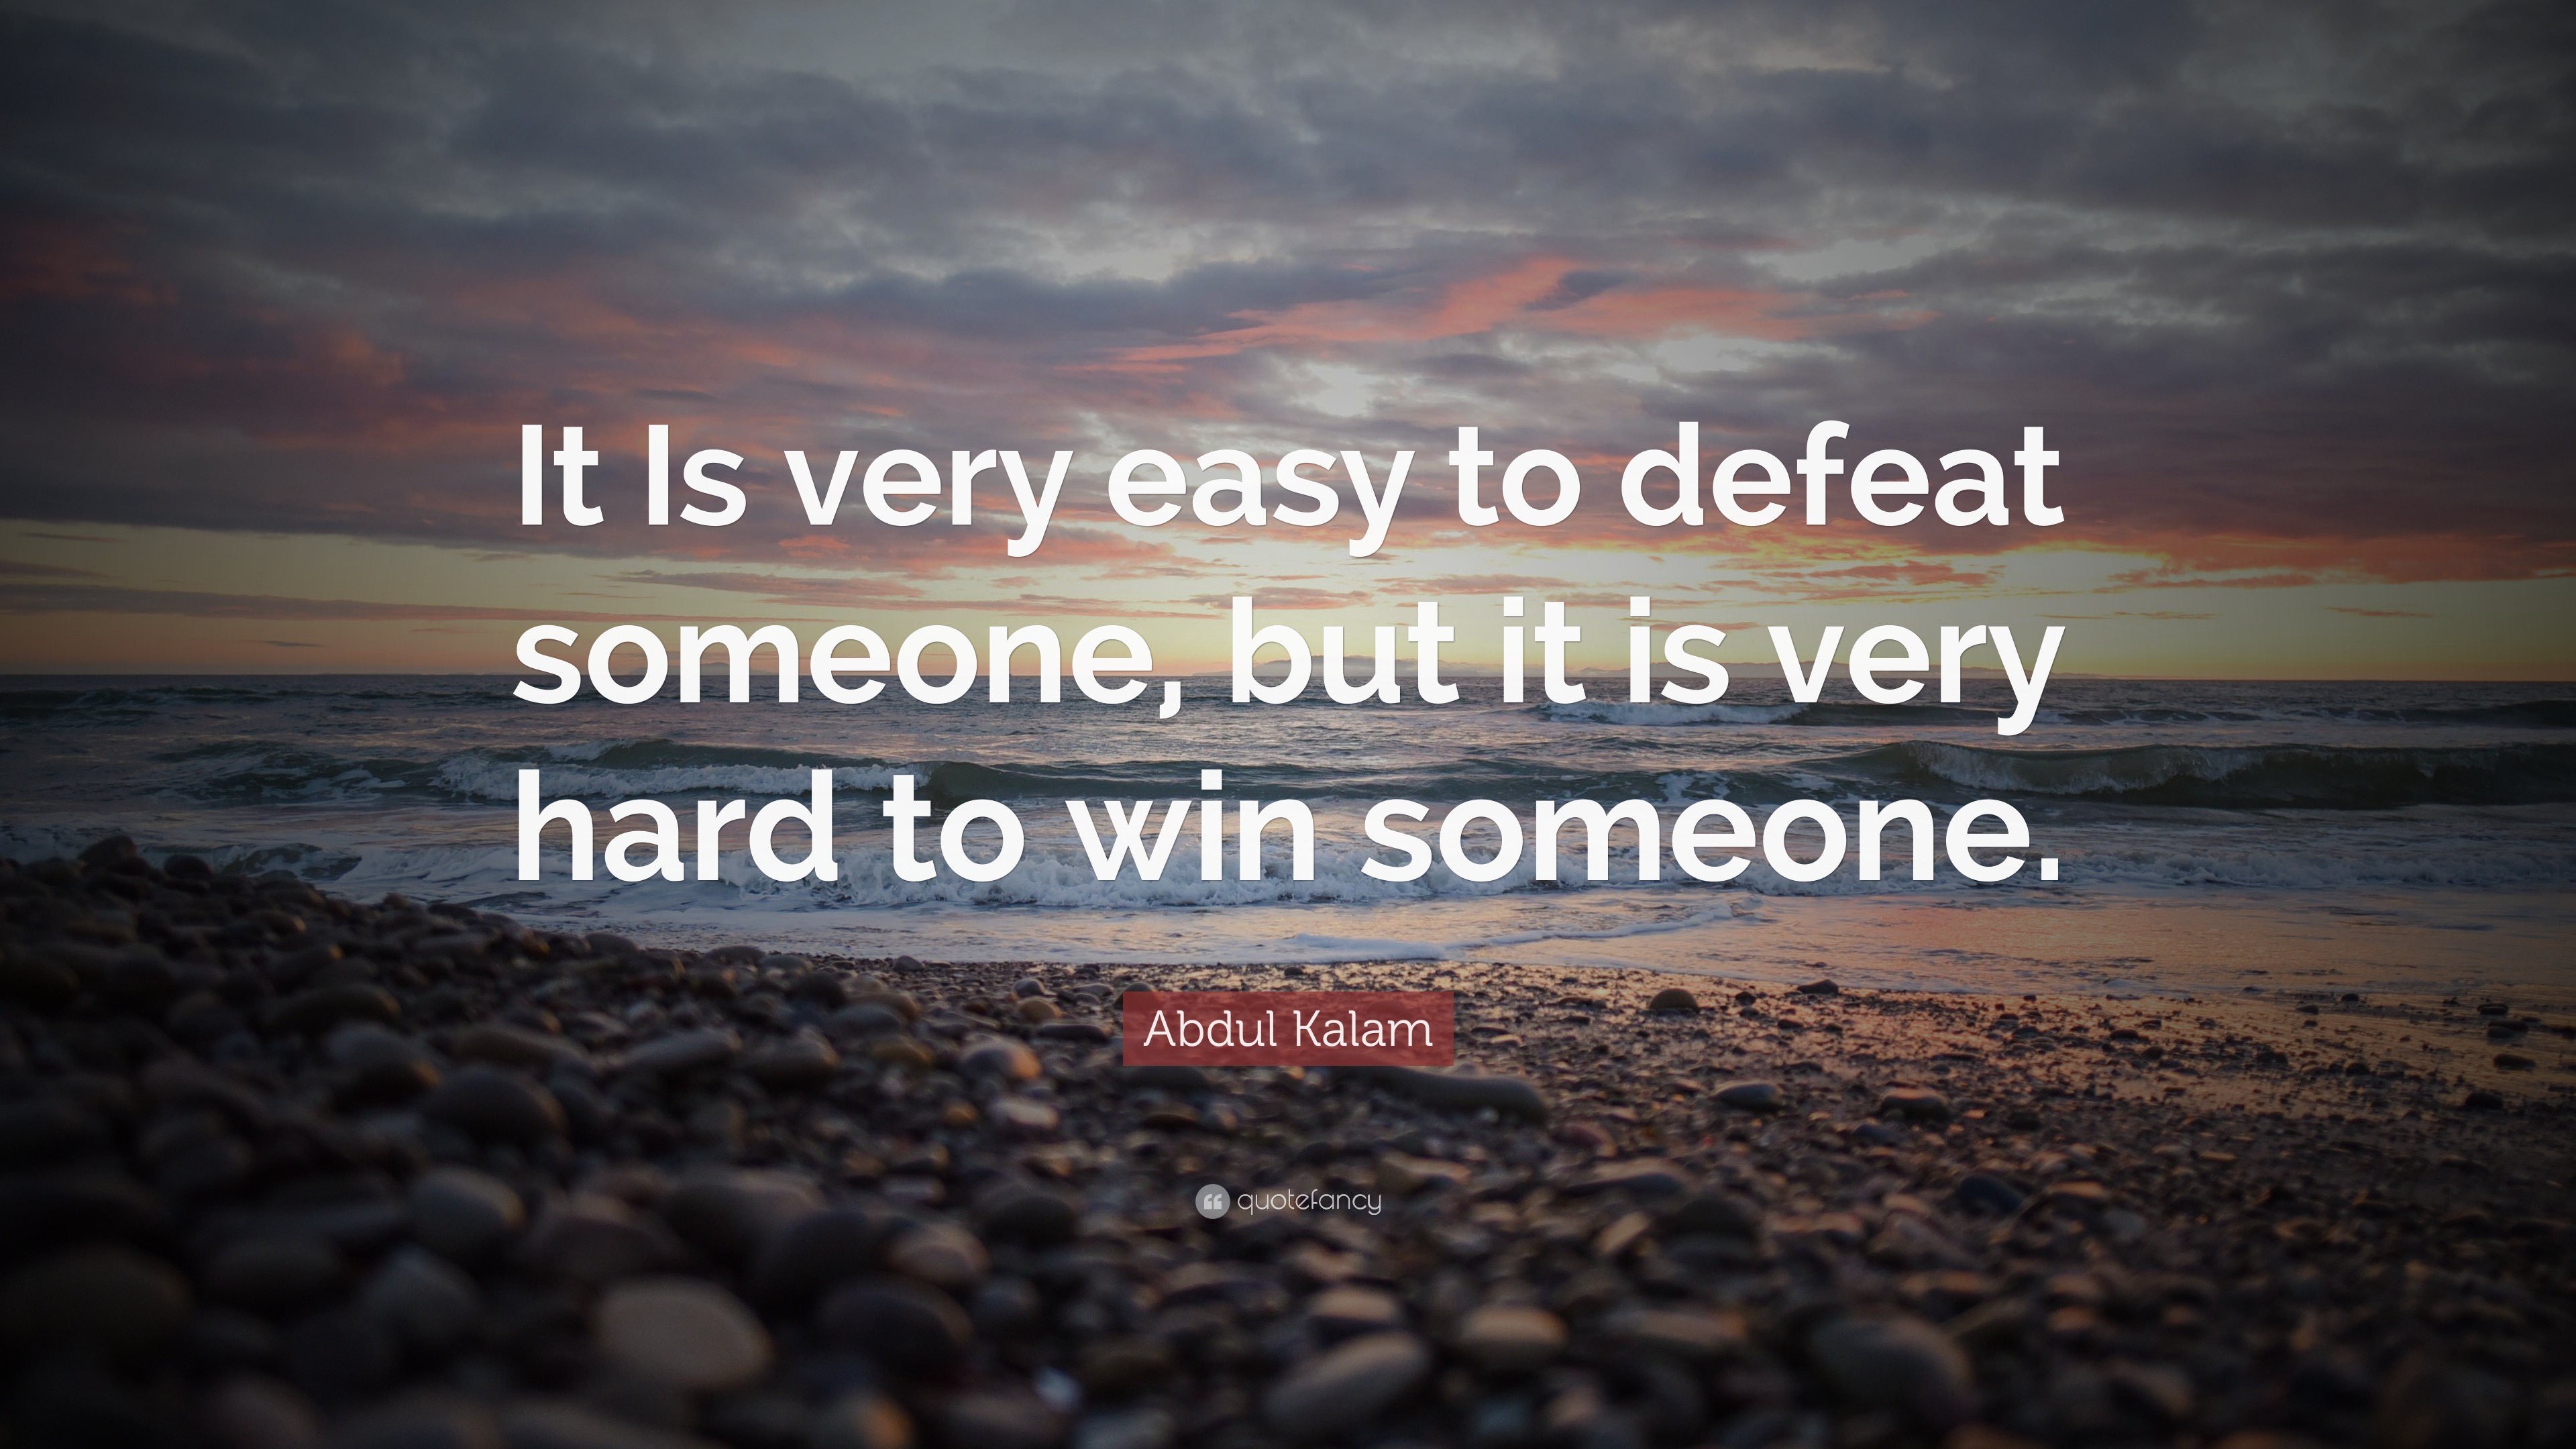 Abdul Kalam Quote: “It Is very easy to defeat someone, but it is very